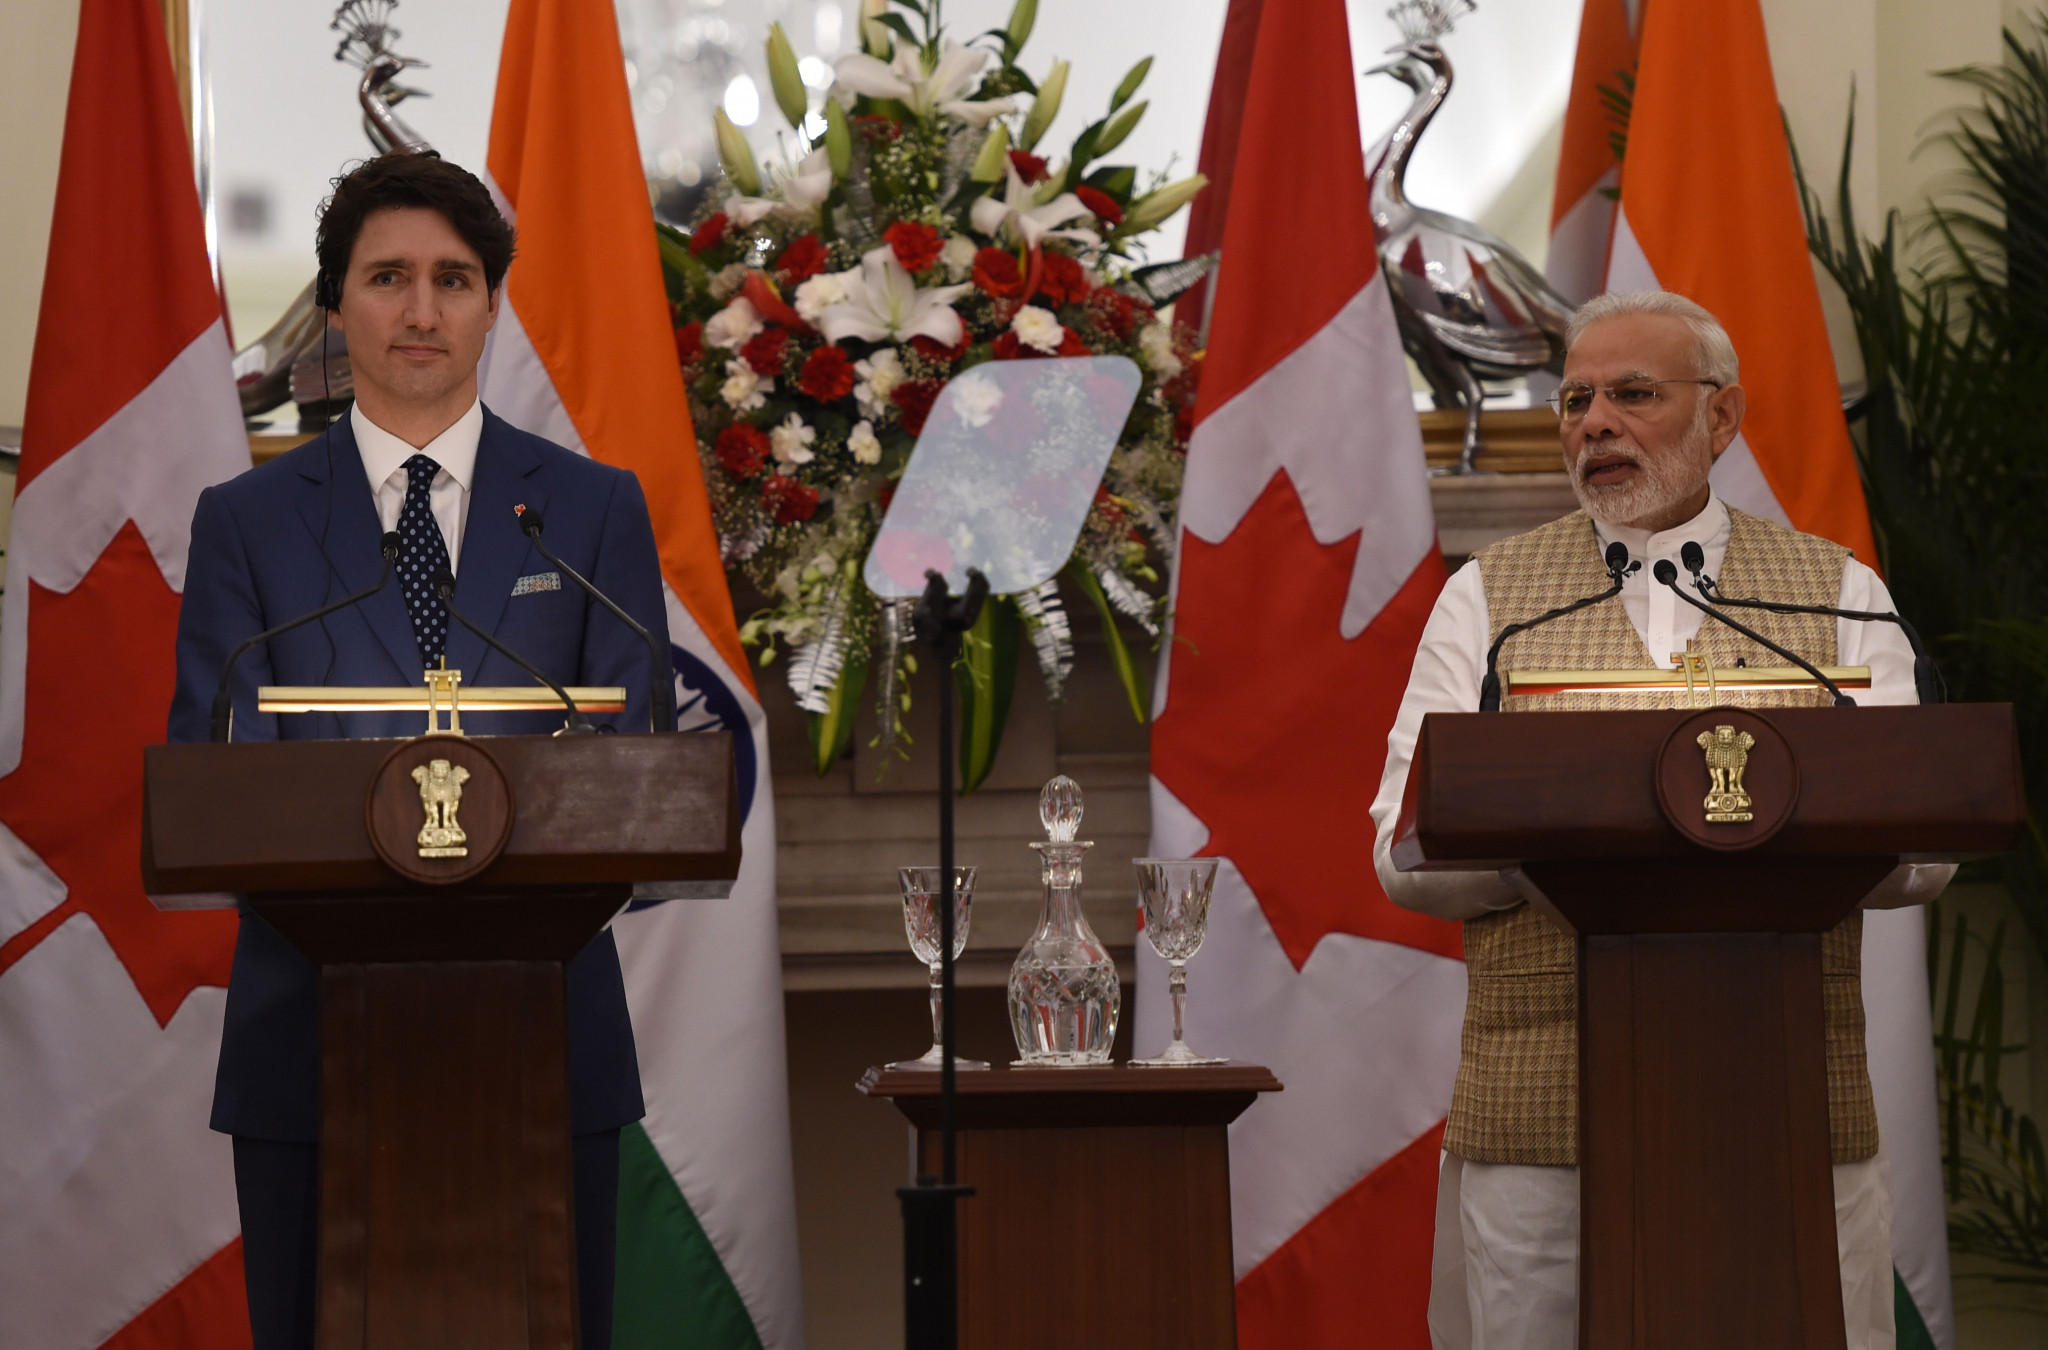 Relations between Canada and India have deteriorated since Canadian Prime Minister Justin Trudeau, left, alleged Indian involvement in the killing of Hardeep Singh Nijjar  ©Getty Images